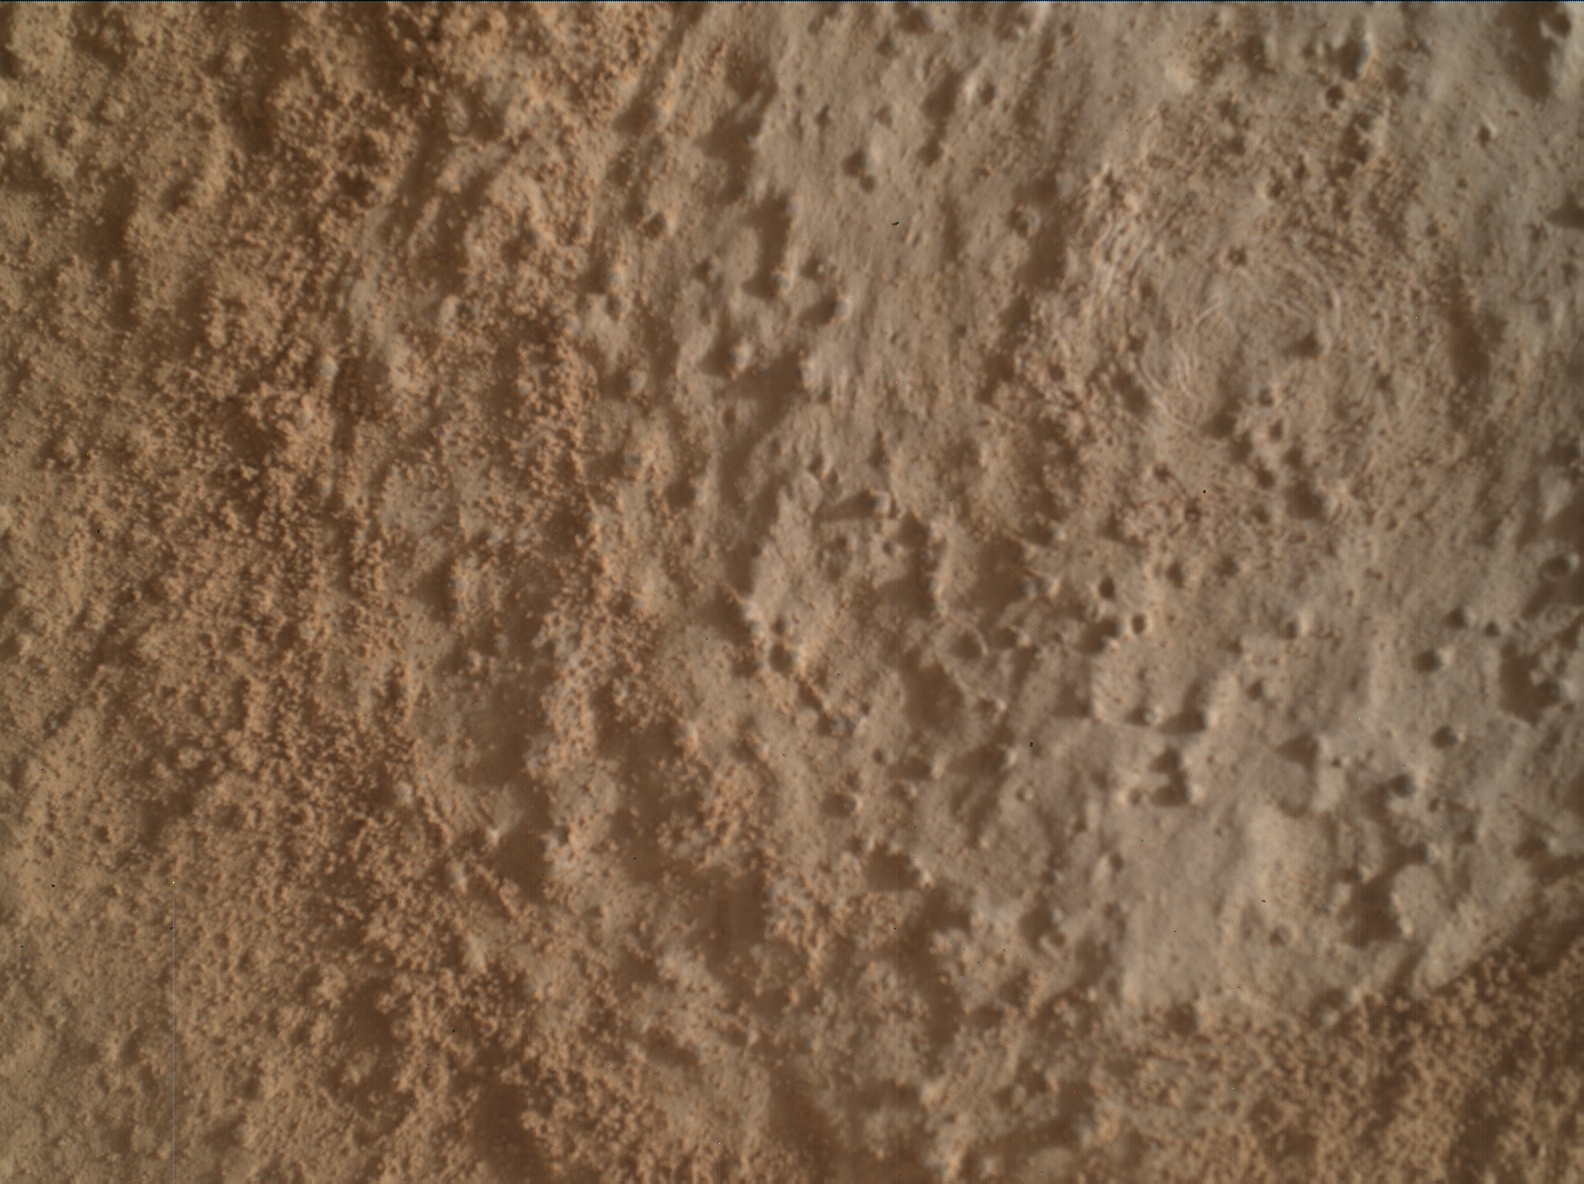 Nasa's Mars rover Curiosity acquired this image using its Mars Hand Lens Imager (MAHLI) on Sol 3388